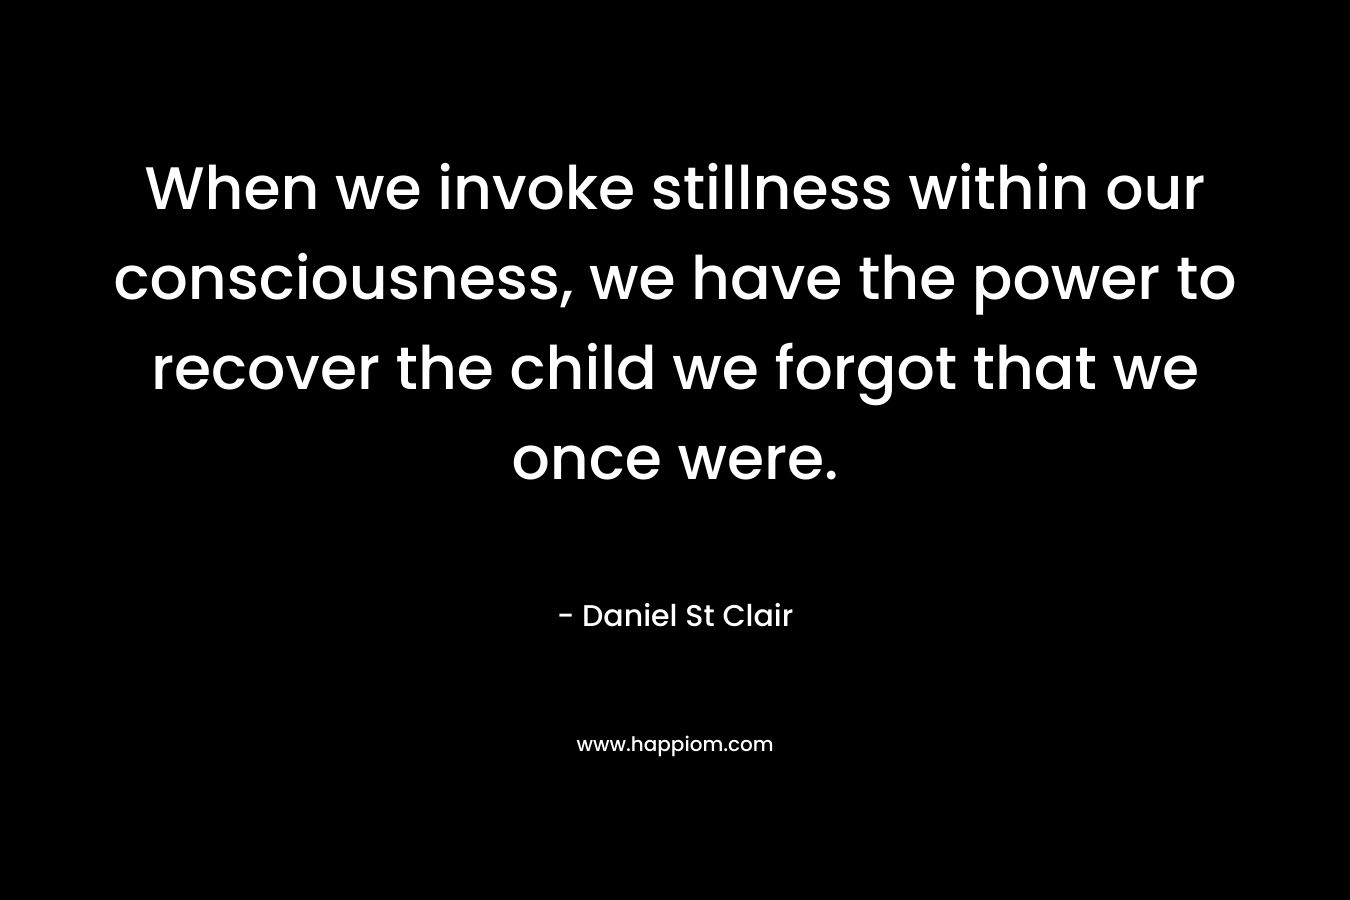 When we invoke stillness within our consciousness, we have the power to recover the child we forgot that we once were.